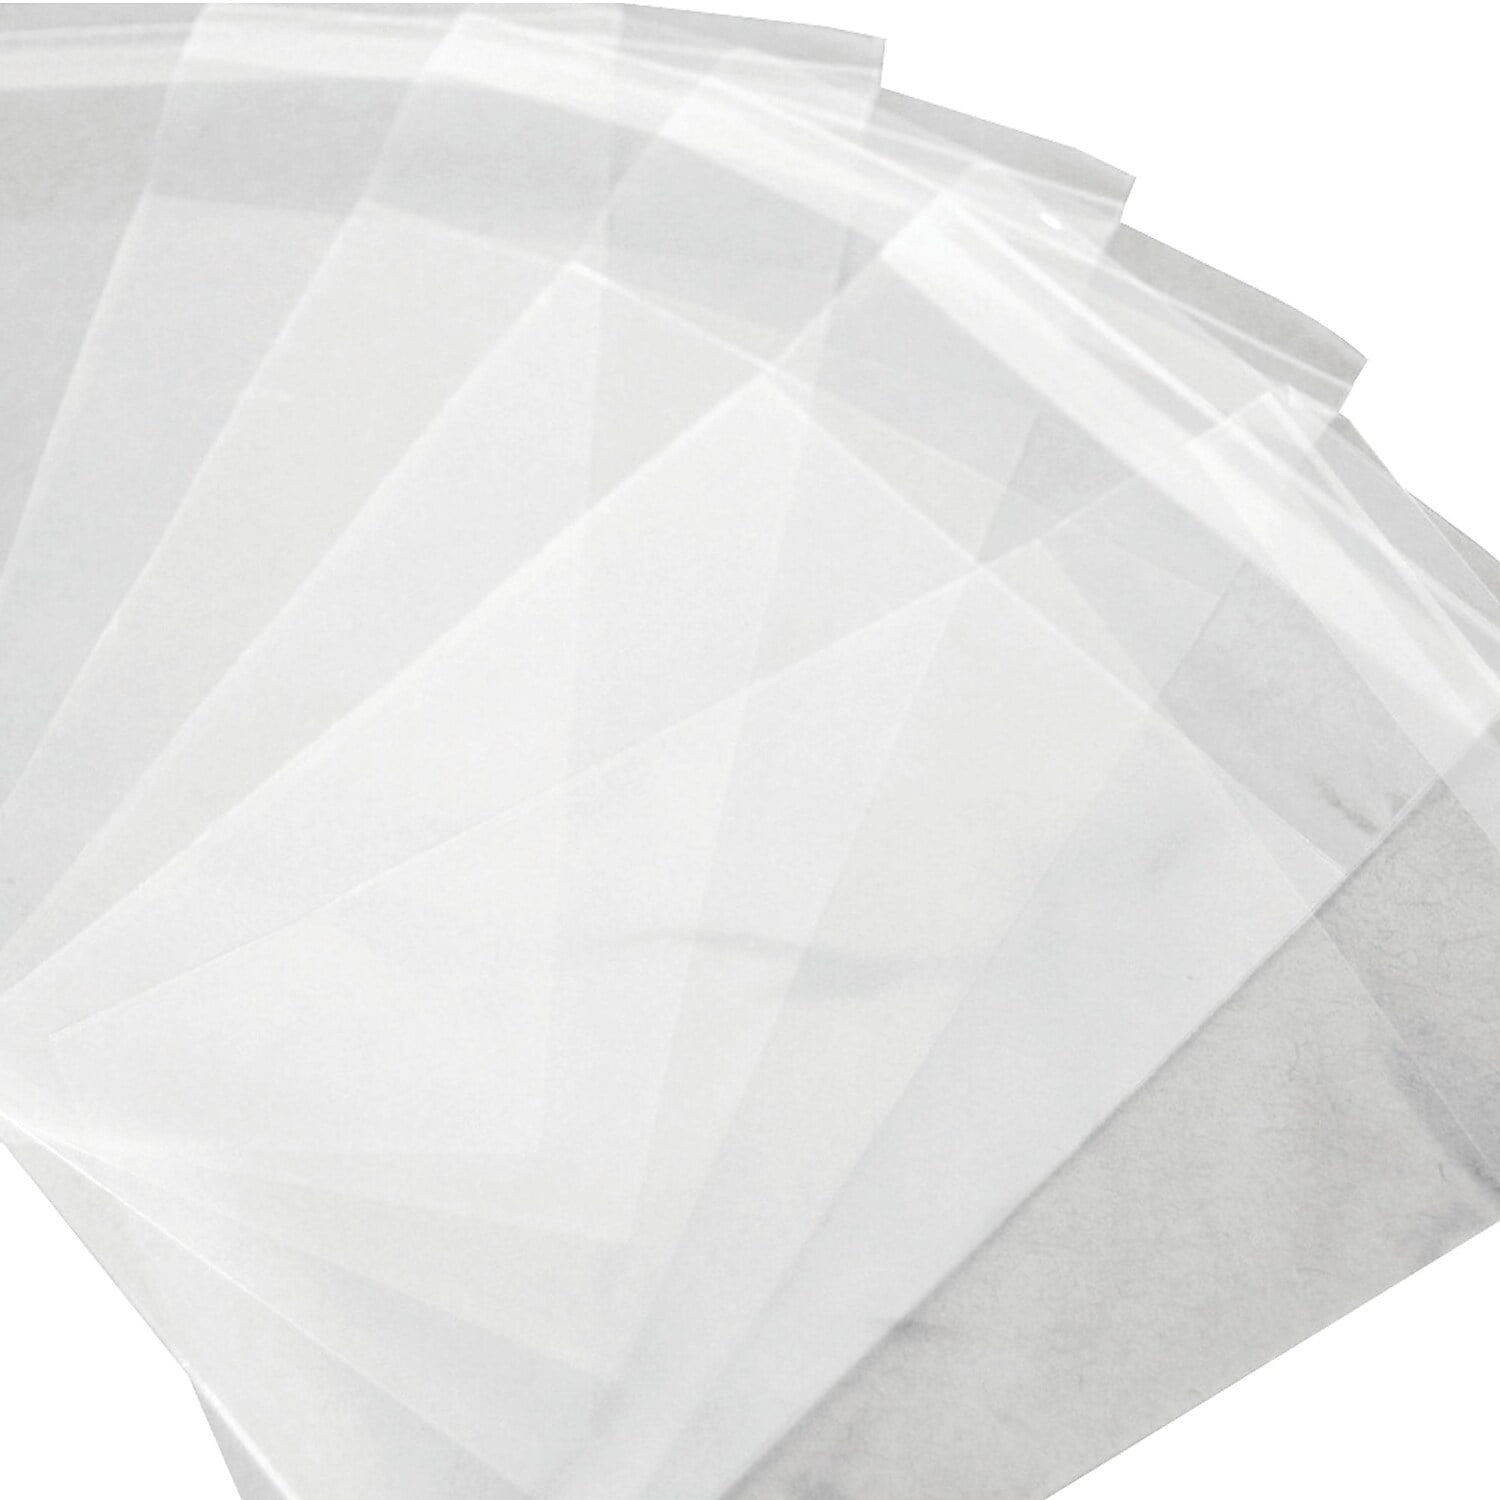 Pbr139 20 X 24 In. 1.5 Mil Resealable Polypropylene Bags Case, Pack Of 1000